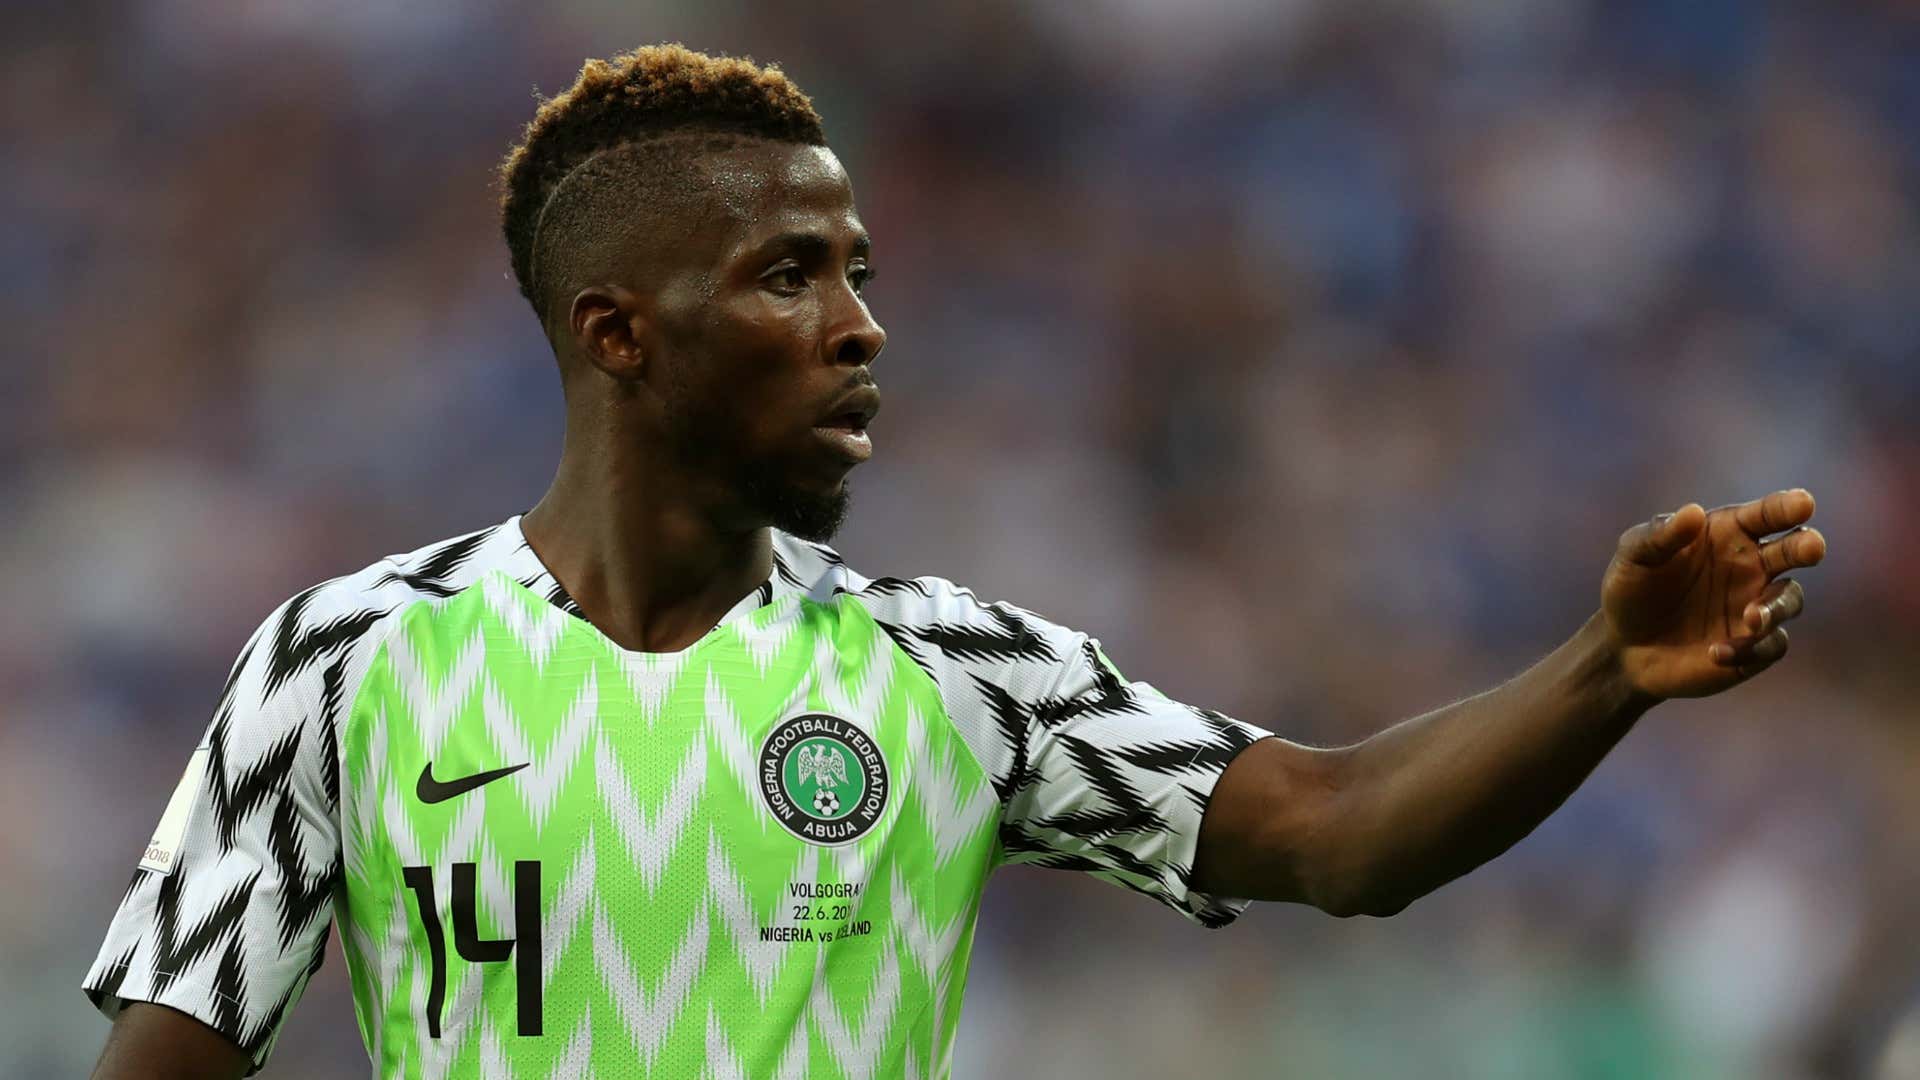 Kelechi Iheanacho fires Nigeria to first AFCON win after clash with Egypt